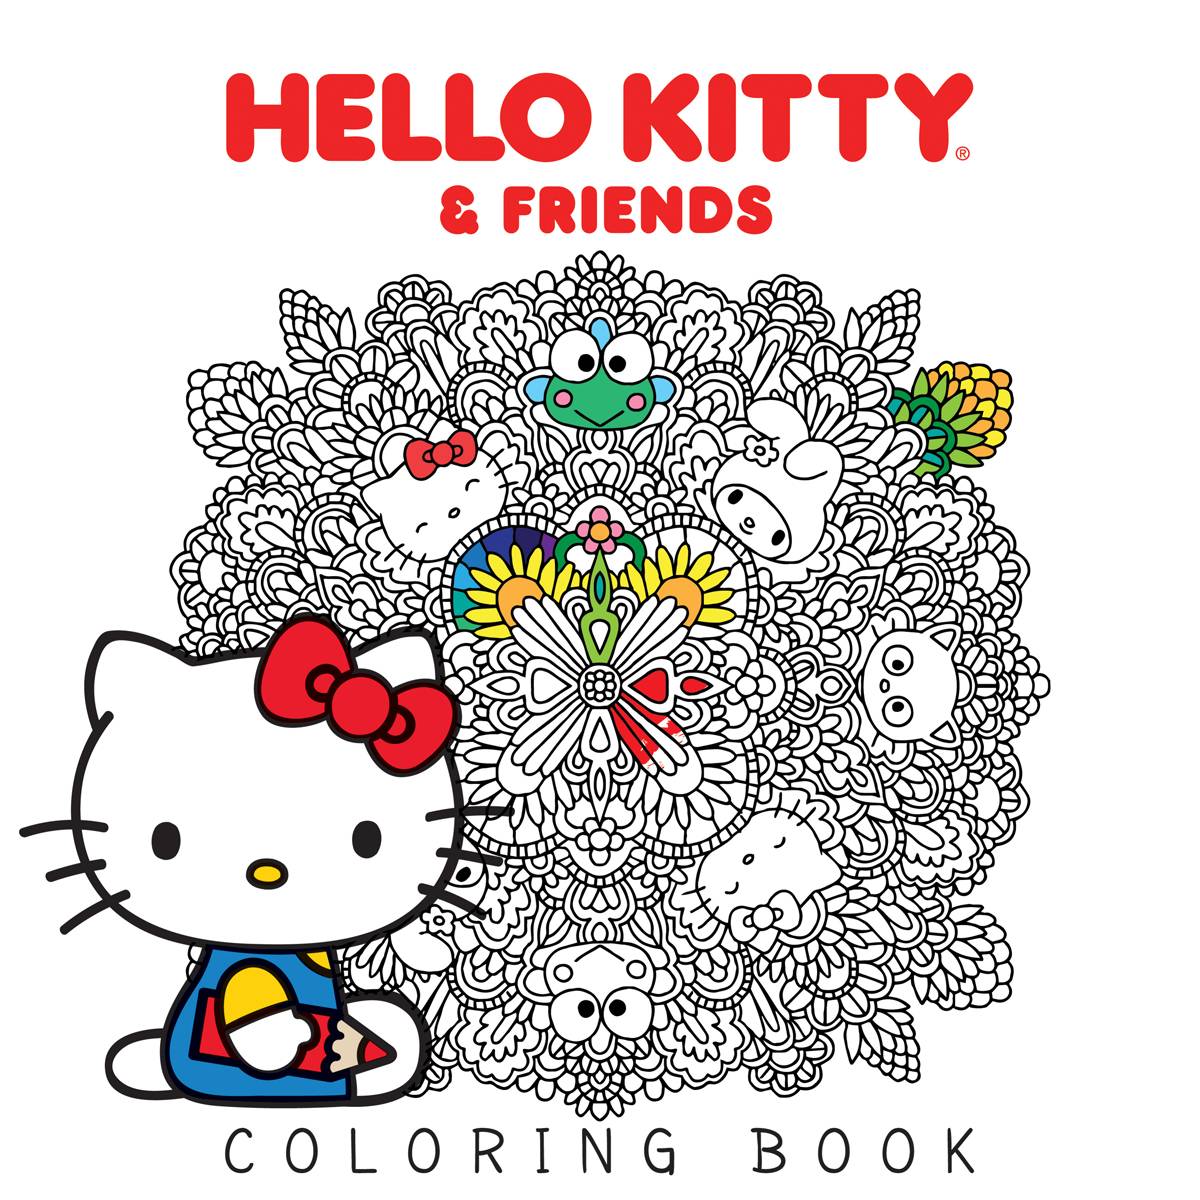 Hello Kitty & Friends Coloring Book Soft Cover